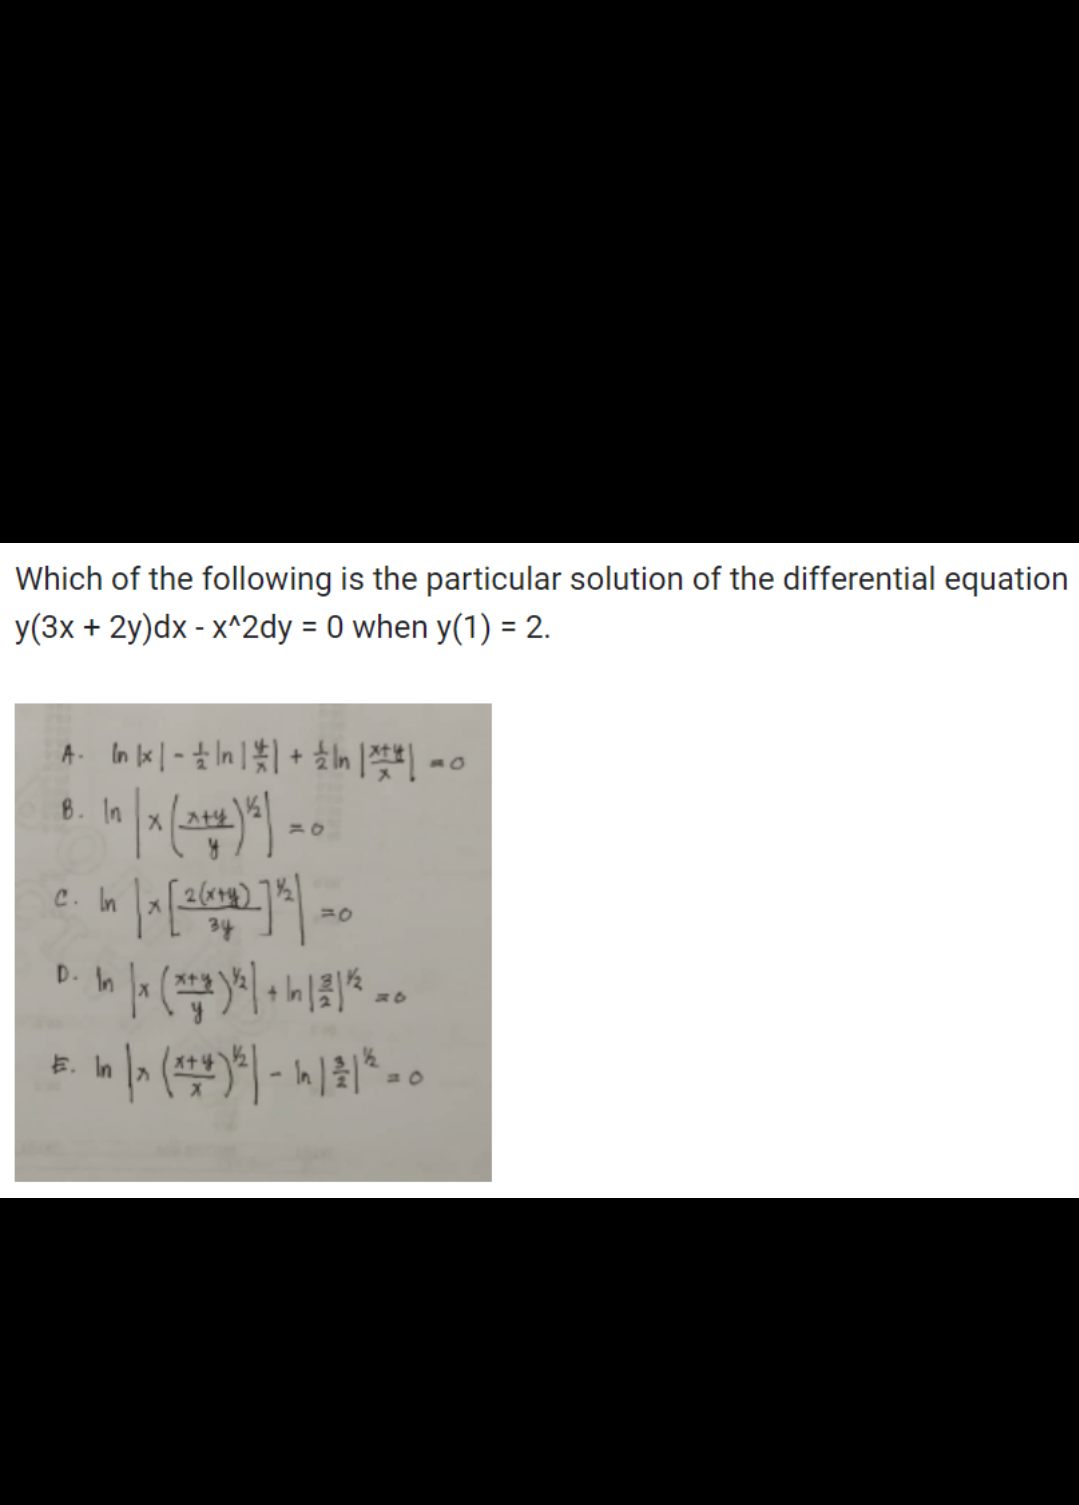 Which of the following is the particular solution of the differential equation
y(3x + 2y)dx - x^2dy = 0 when y(1) = 2.
A. Inkx|-|n| | + | | |-o
In |x (2+12) 5) = 0
in | x [2²(6+1) 71² ) = 0
D. In |x (x+2)/² + 1 | 2 | ²20
E.
- In | x (x+4)*2) - In 1 2 1 ² = 0
B. In
C. In